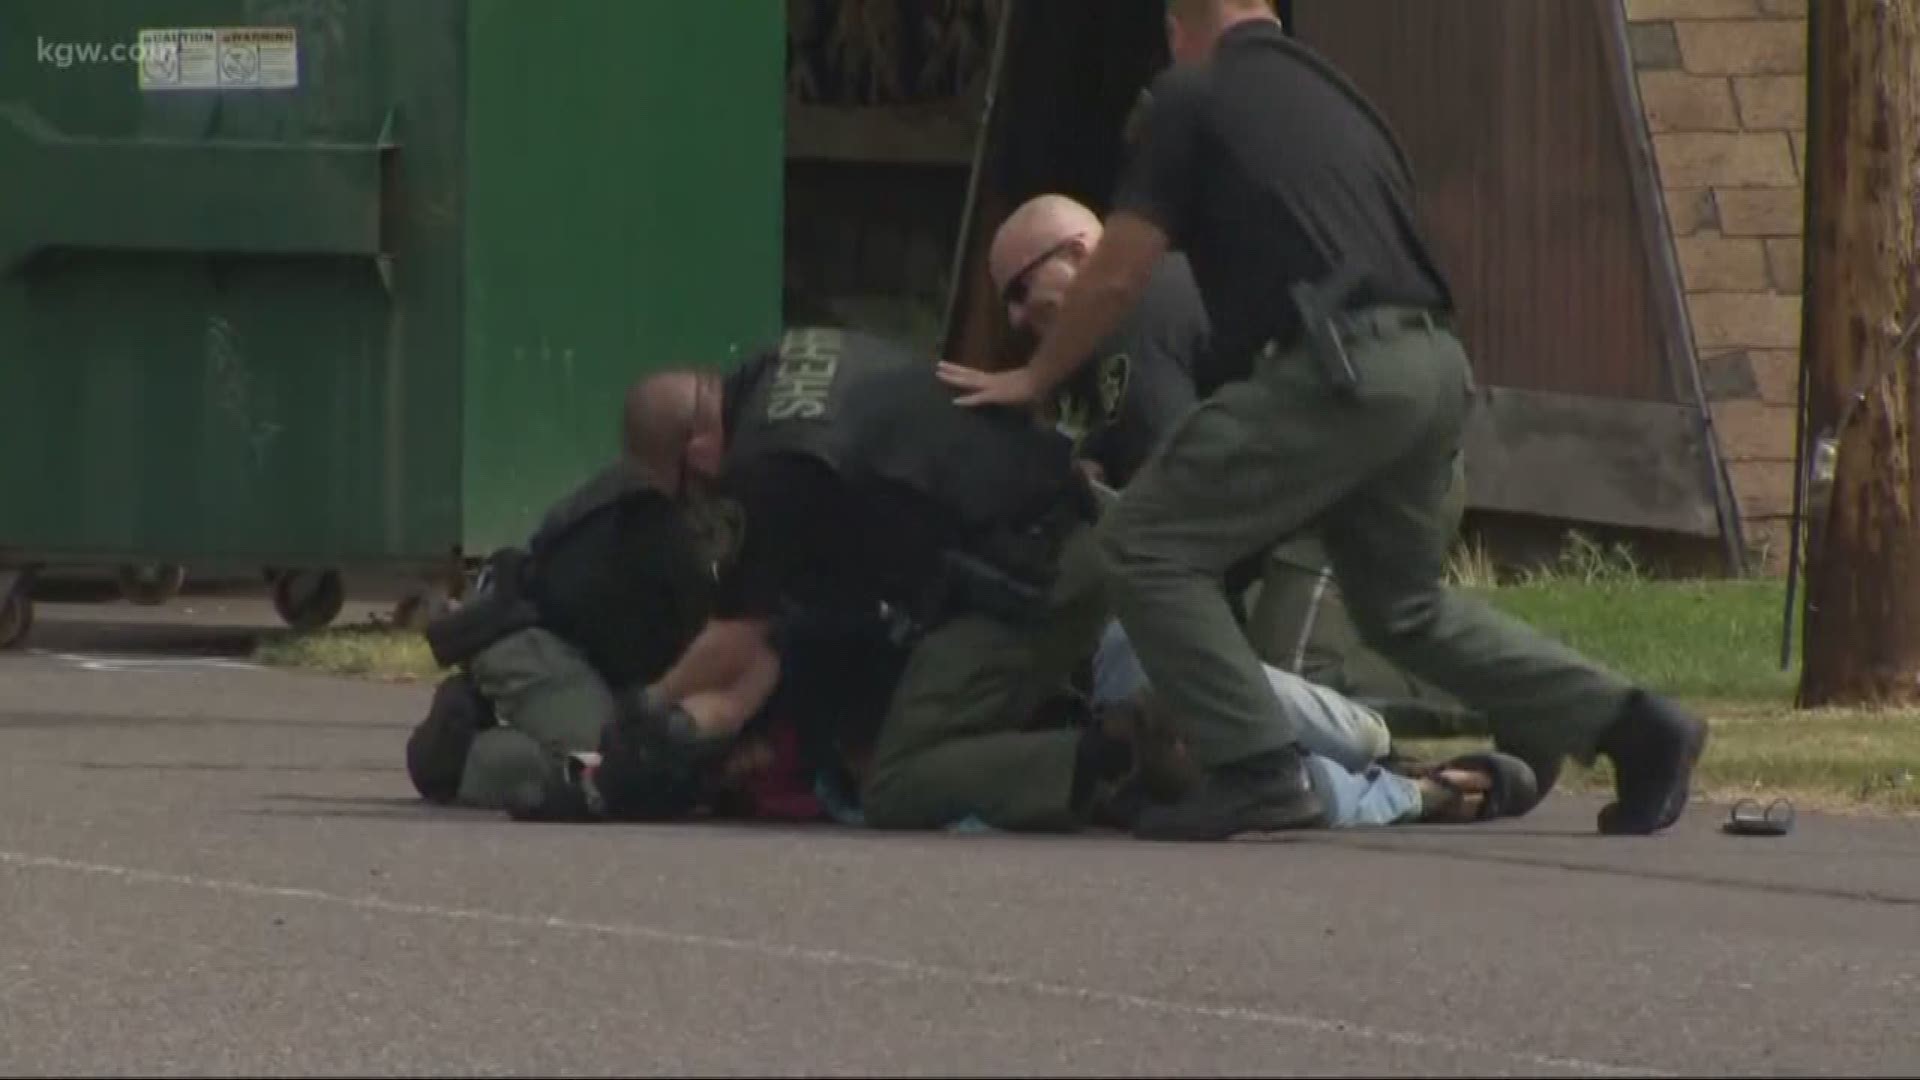 Looking for answers after a deputy was seen on video repeatedly punching a homeless man.